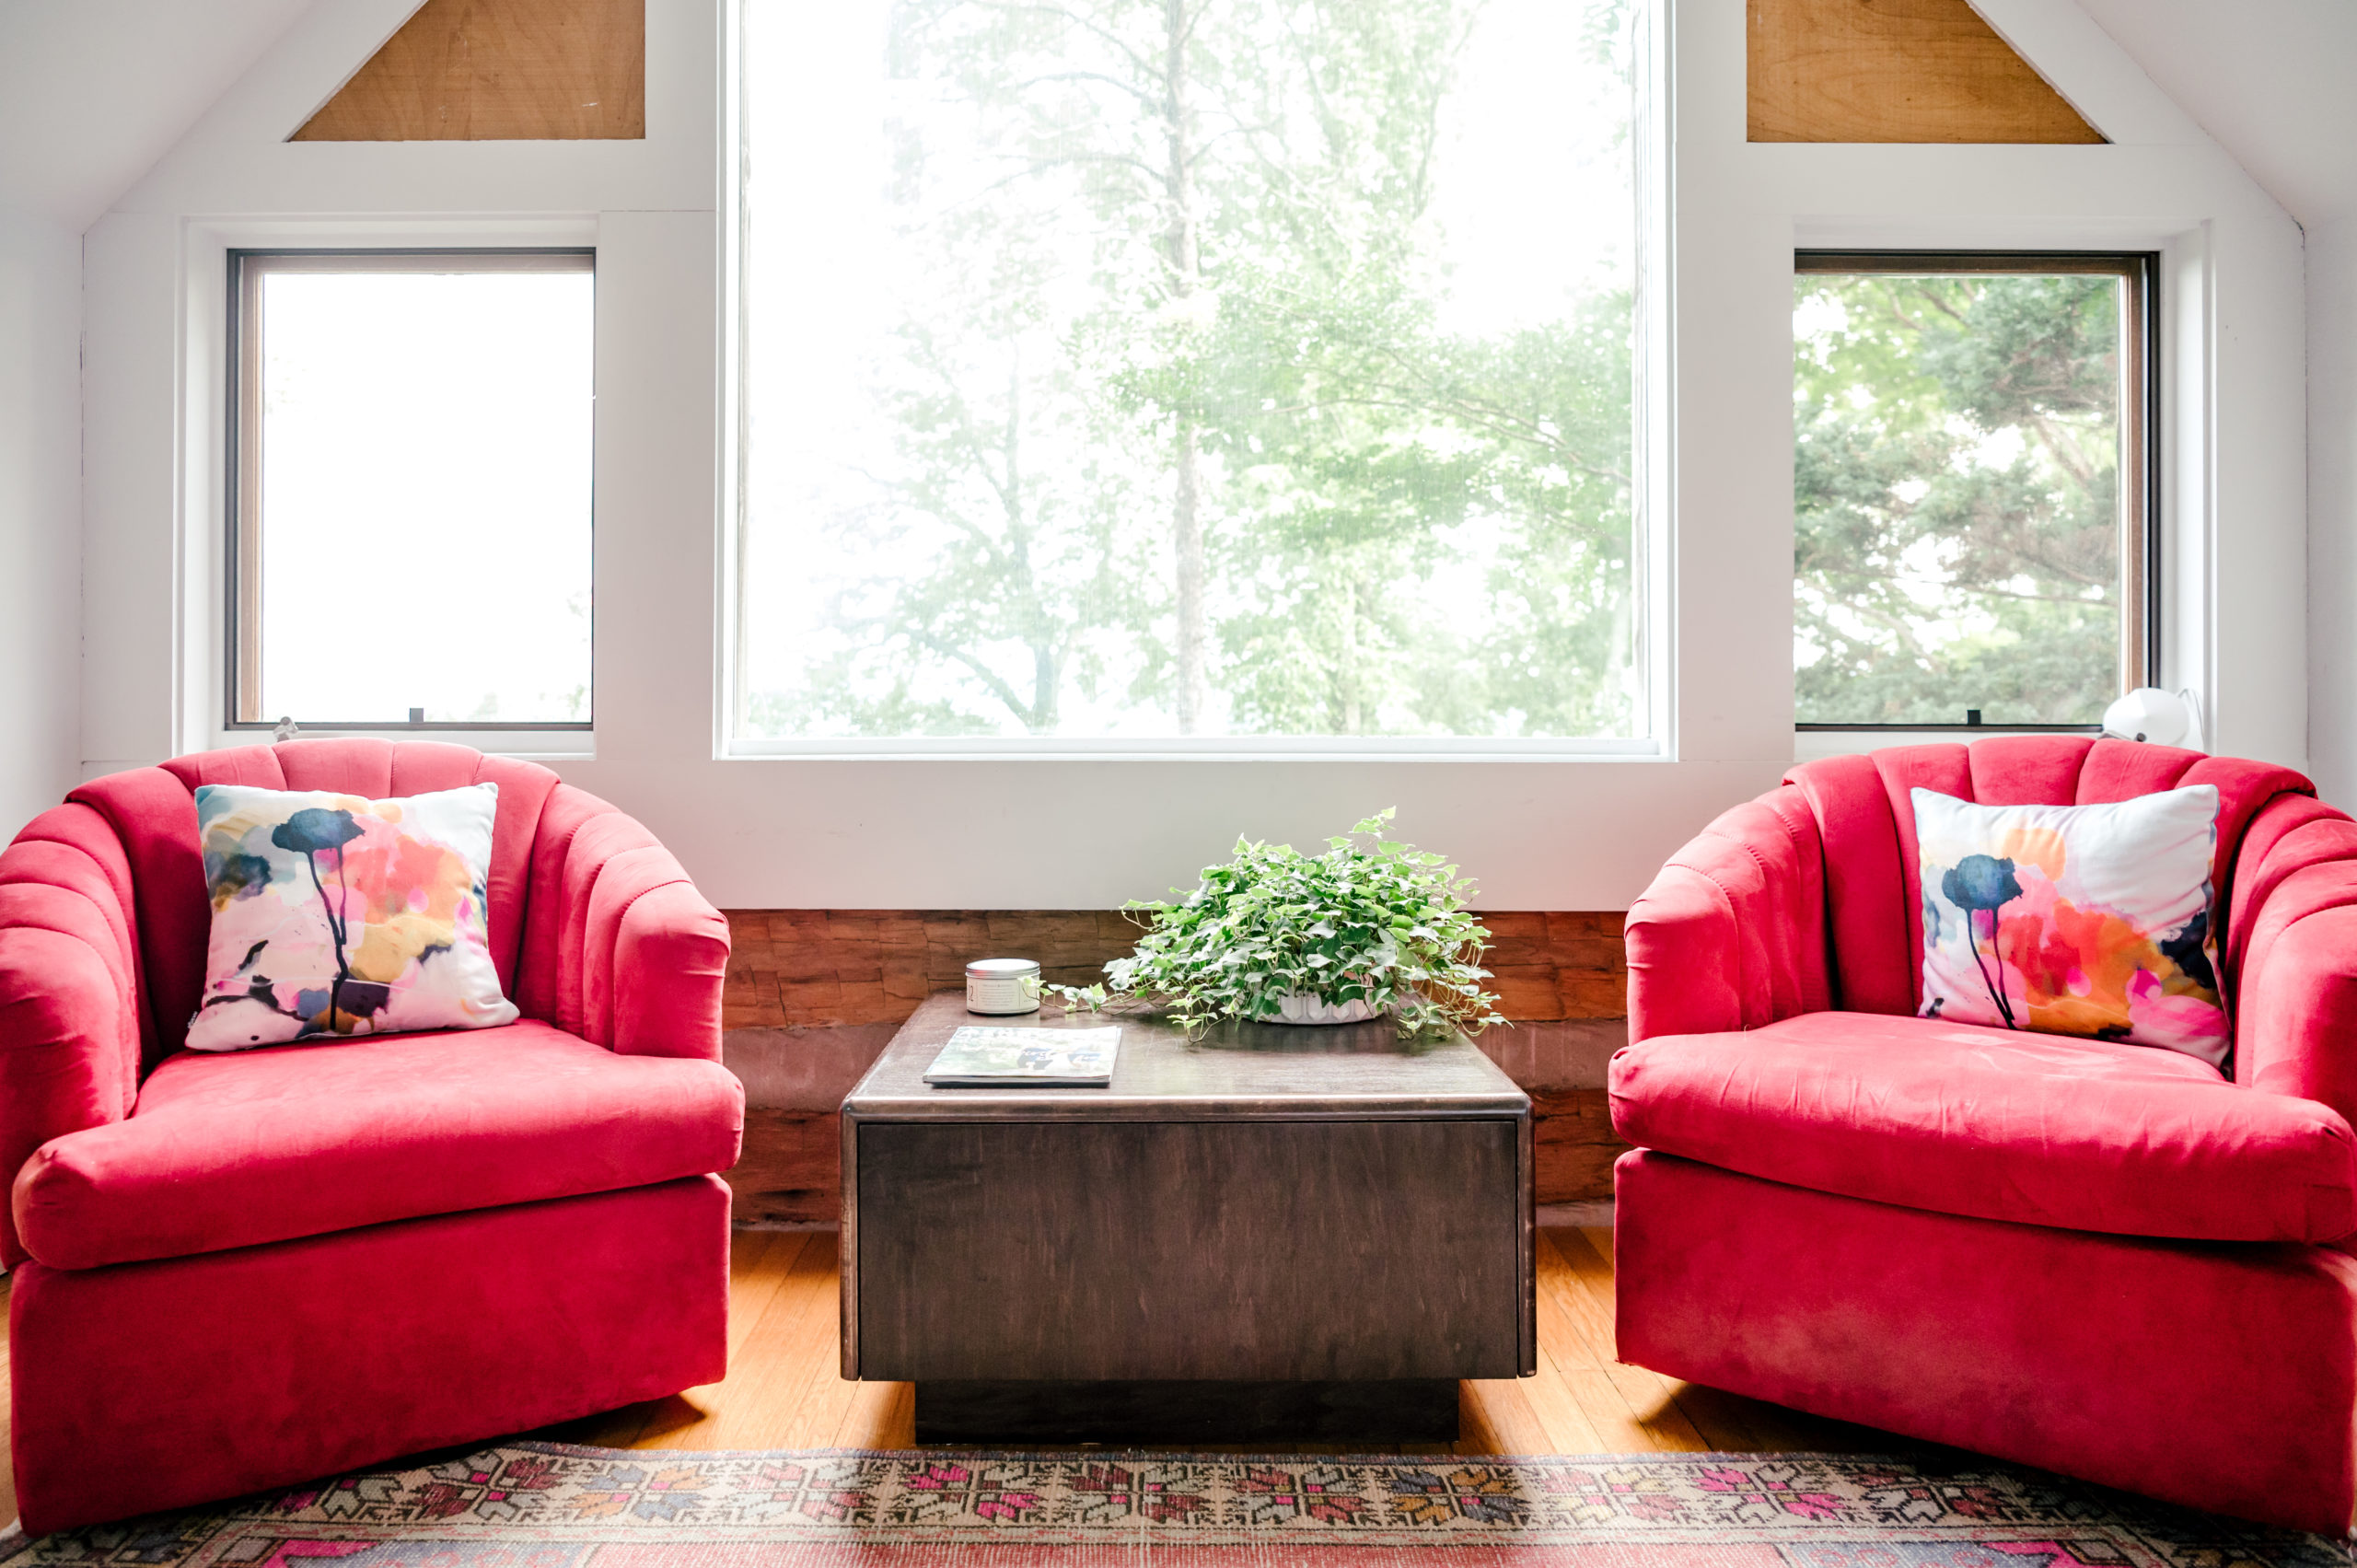 Photo of living room interior furniture, with a wooden table between two red love seats with pillows sitting on them